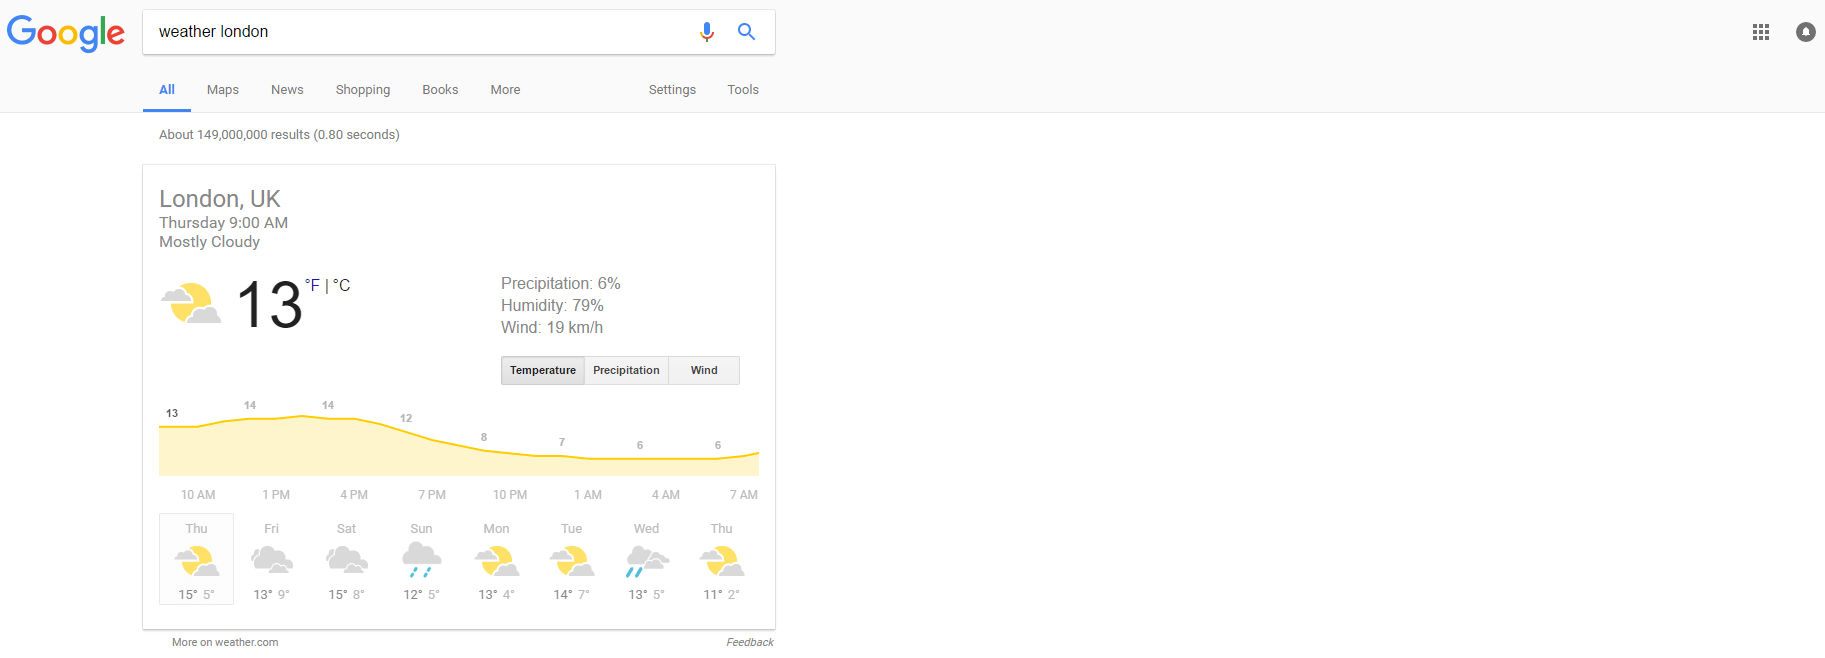 Google’s weather service for London